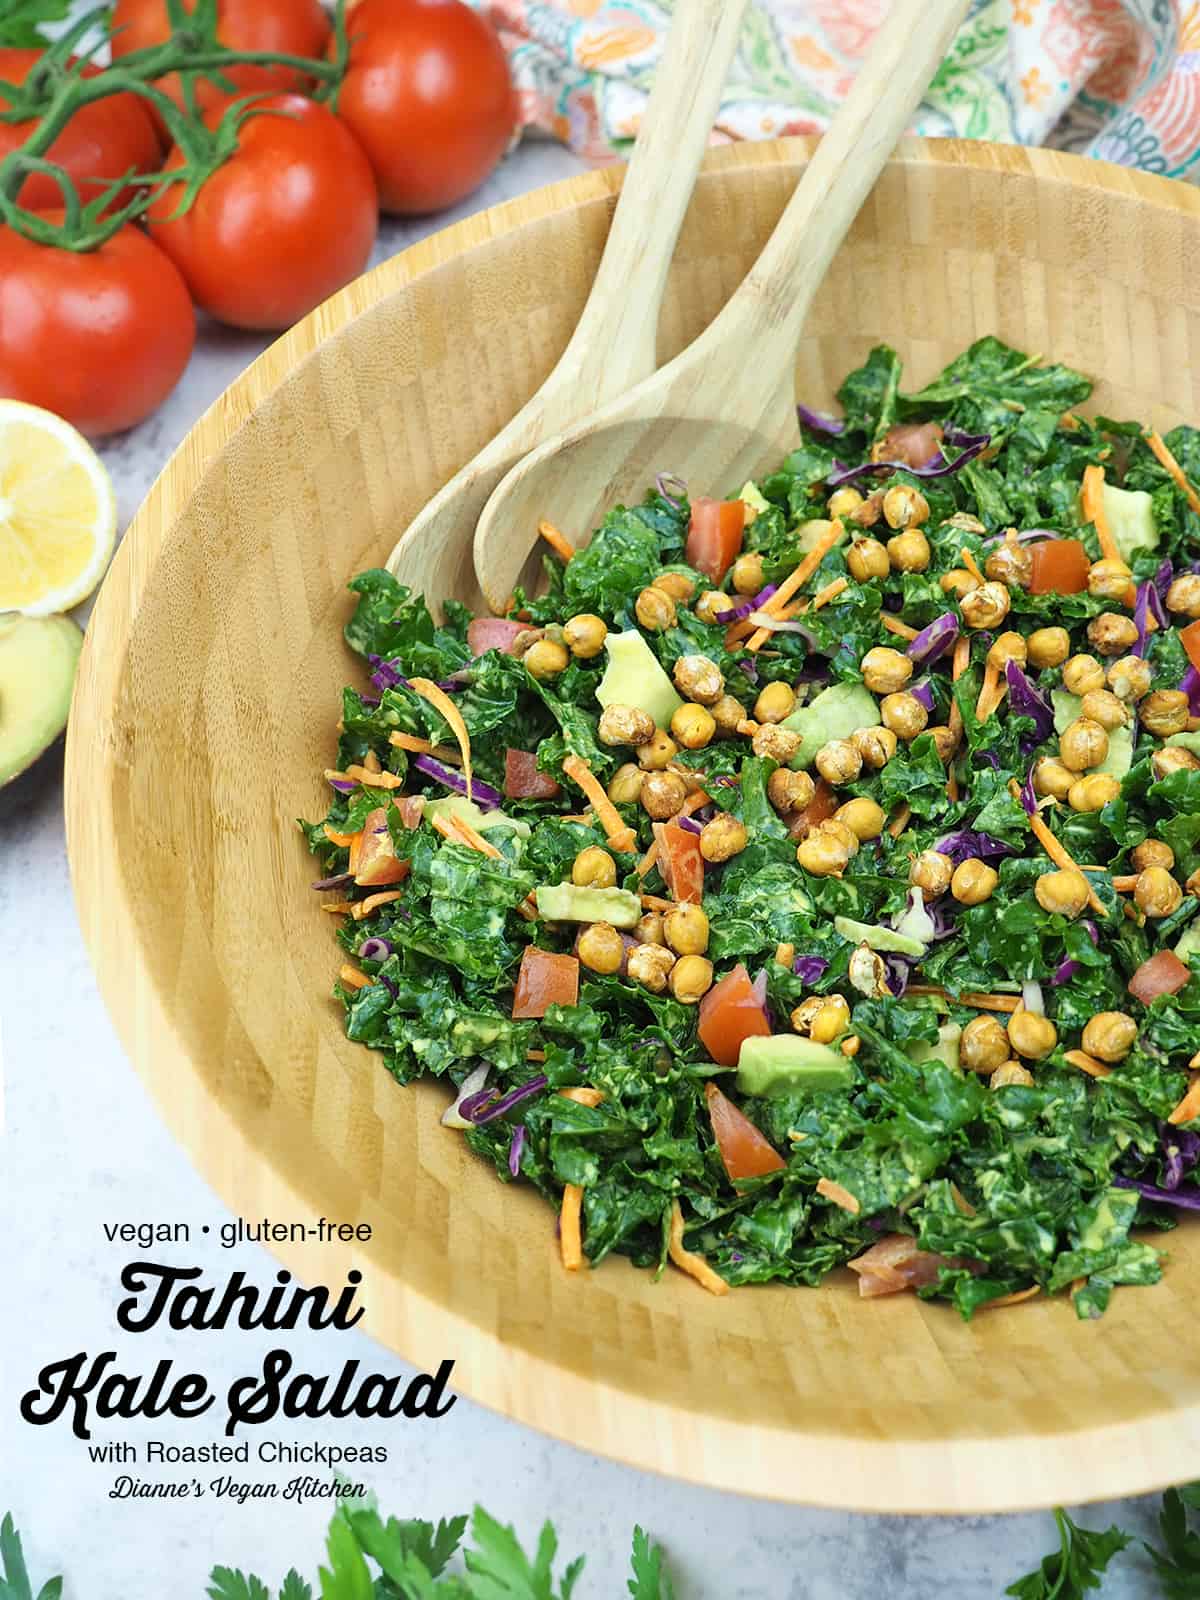 Tahini Kale Salad with Roasted Chickpeas with text overlay